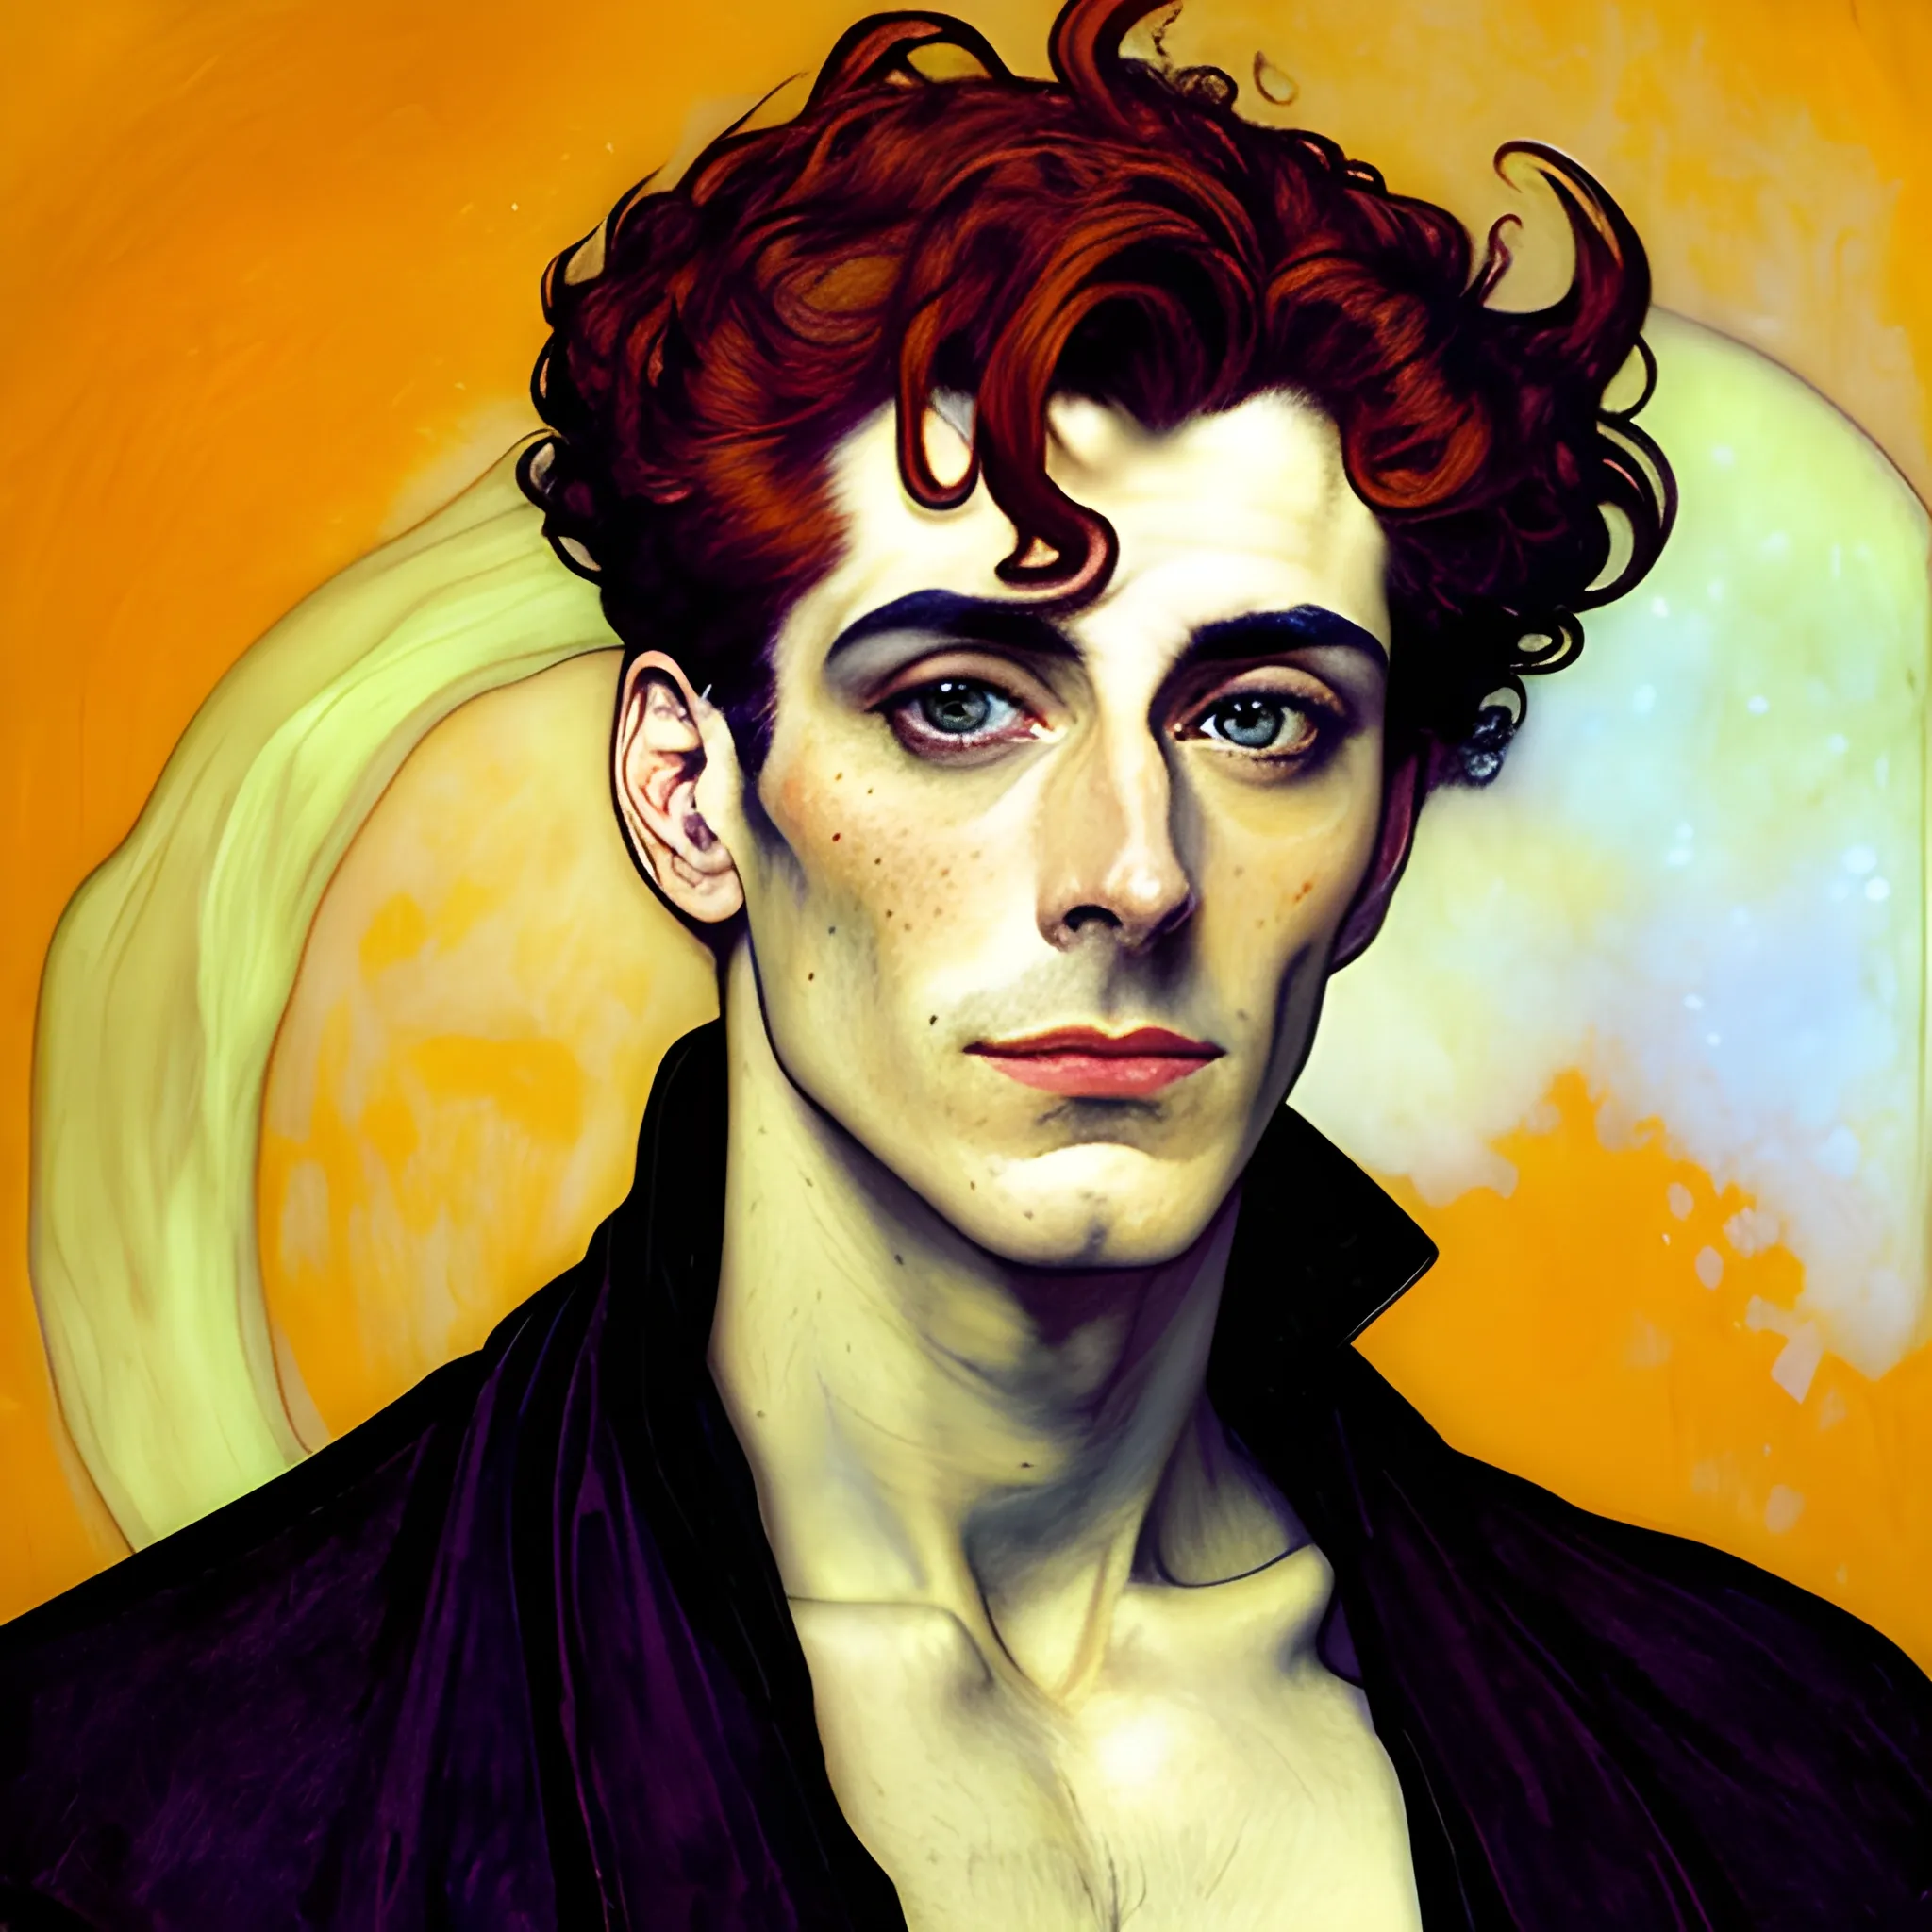 Painting of a handsome young delicate beautiful softly freckled man in his 20s with green eyes and long, curly red hair, at the giant jack o'lantern halloween party; pumpkins, perfect purple pumpkins, green skulls, orange bats, magic, candles, neon spray paint, acrylic paint, fantastical, elegant, stylized art, under a painted nebula sky, full moon; bats, pumpkins, spooky ambiance, Halloween Night art by alphonse mucha, vincent van gogh, egon schiele